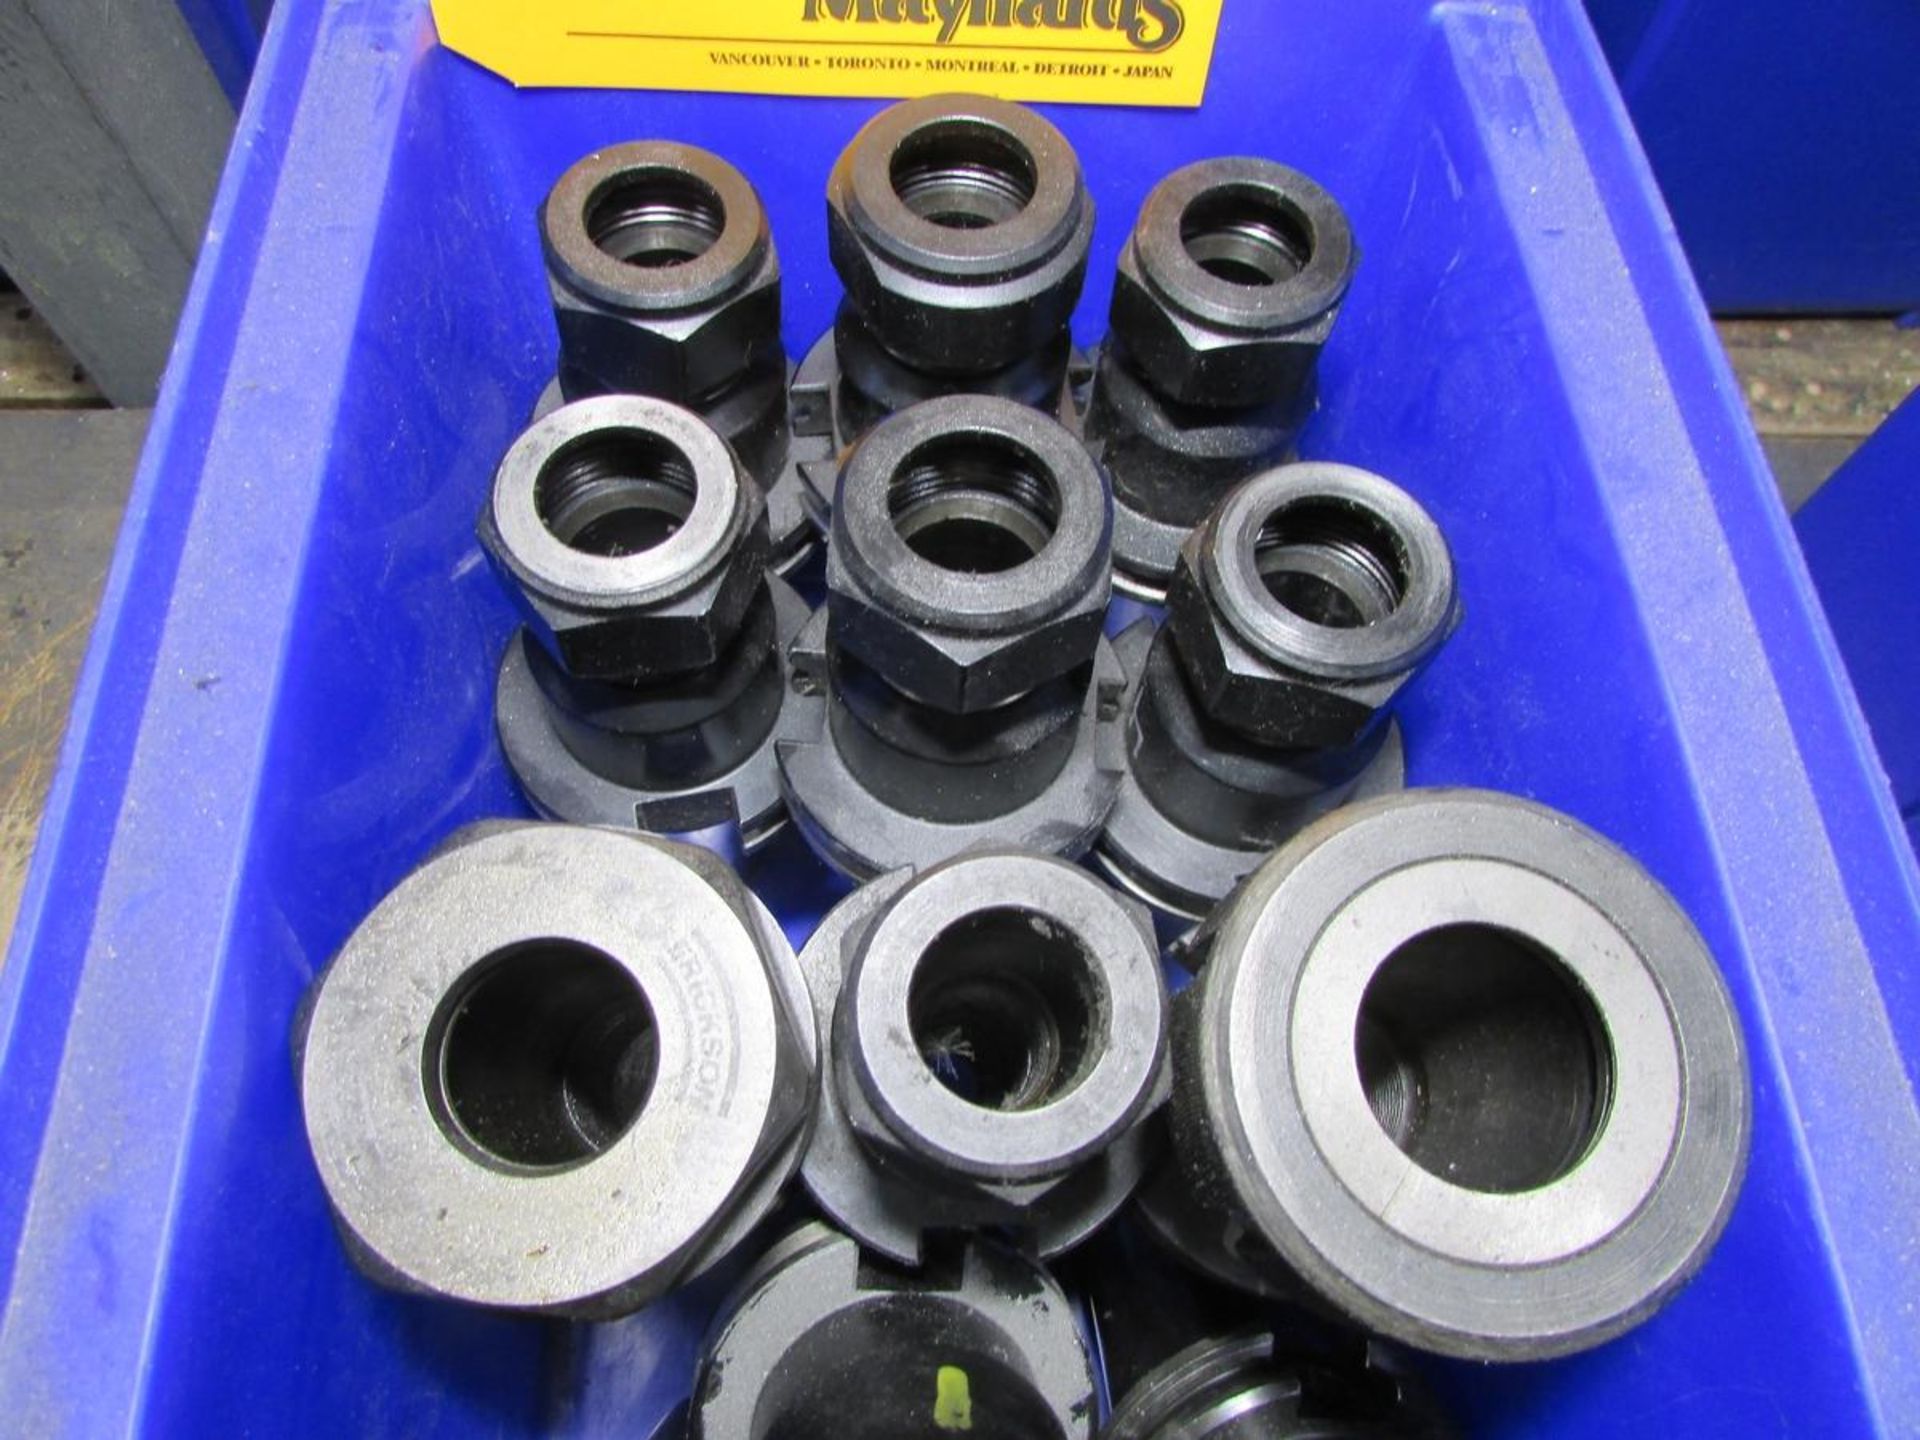 Assorted CAT 40 Taper Tool Holders - Image 4 of 4